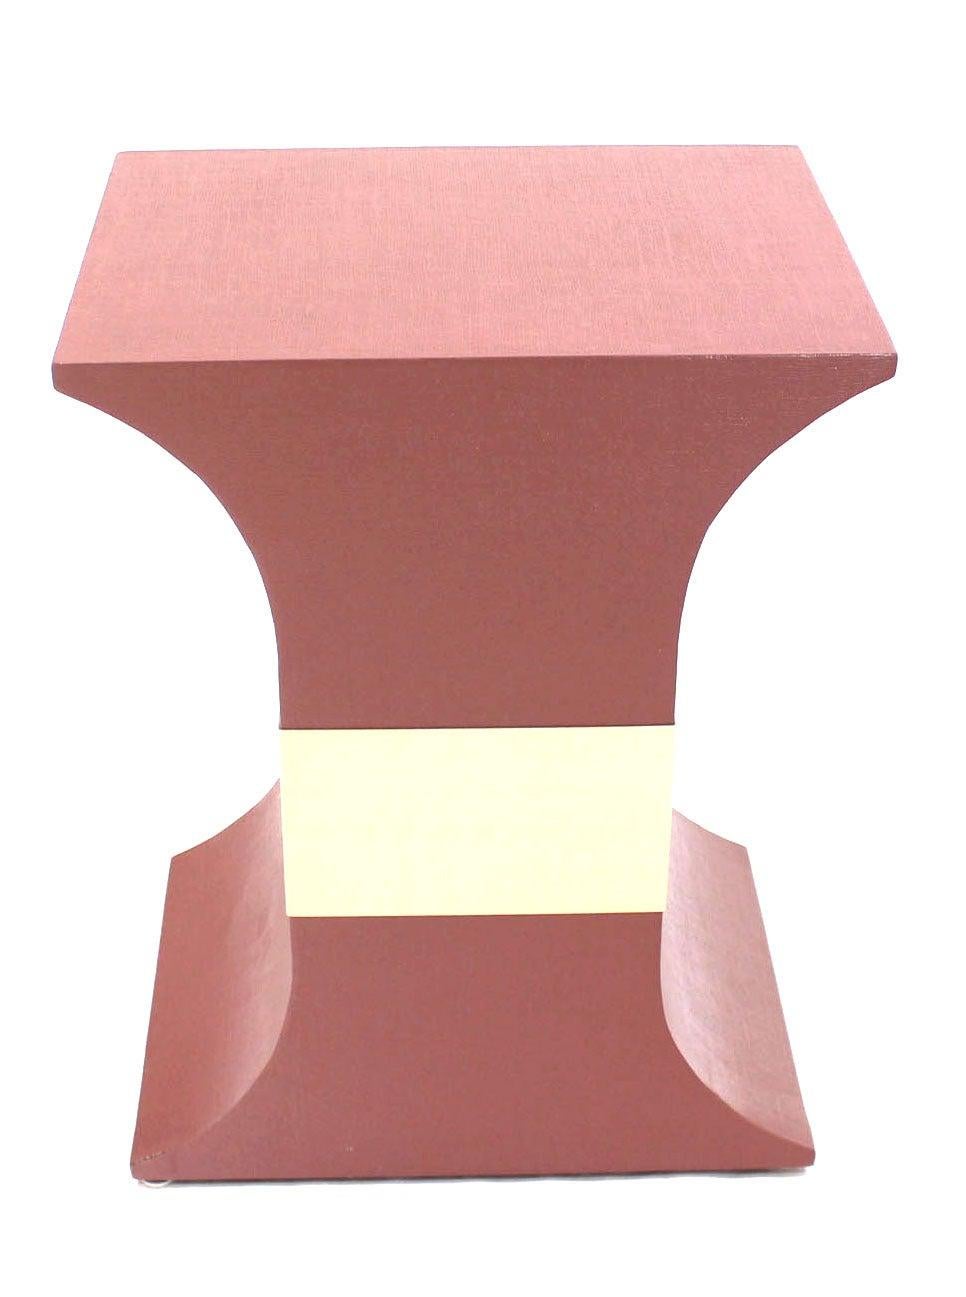 Grasscloth Wrapped Three Mid Century Modern Pink Lacquer Brass Trim Pedestals For Sale 2